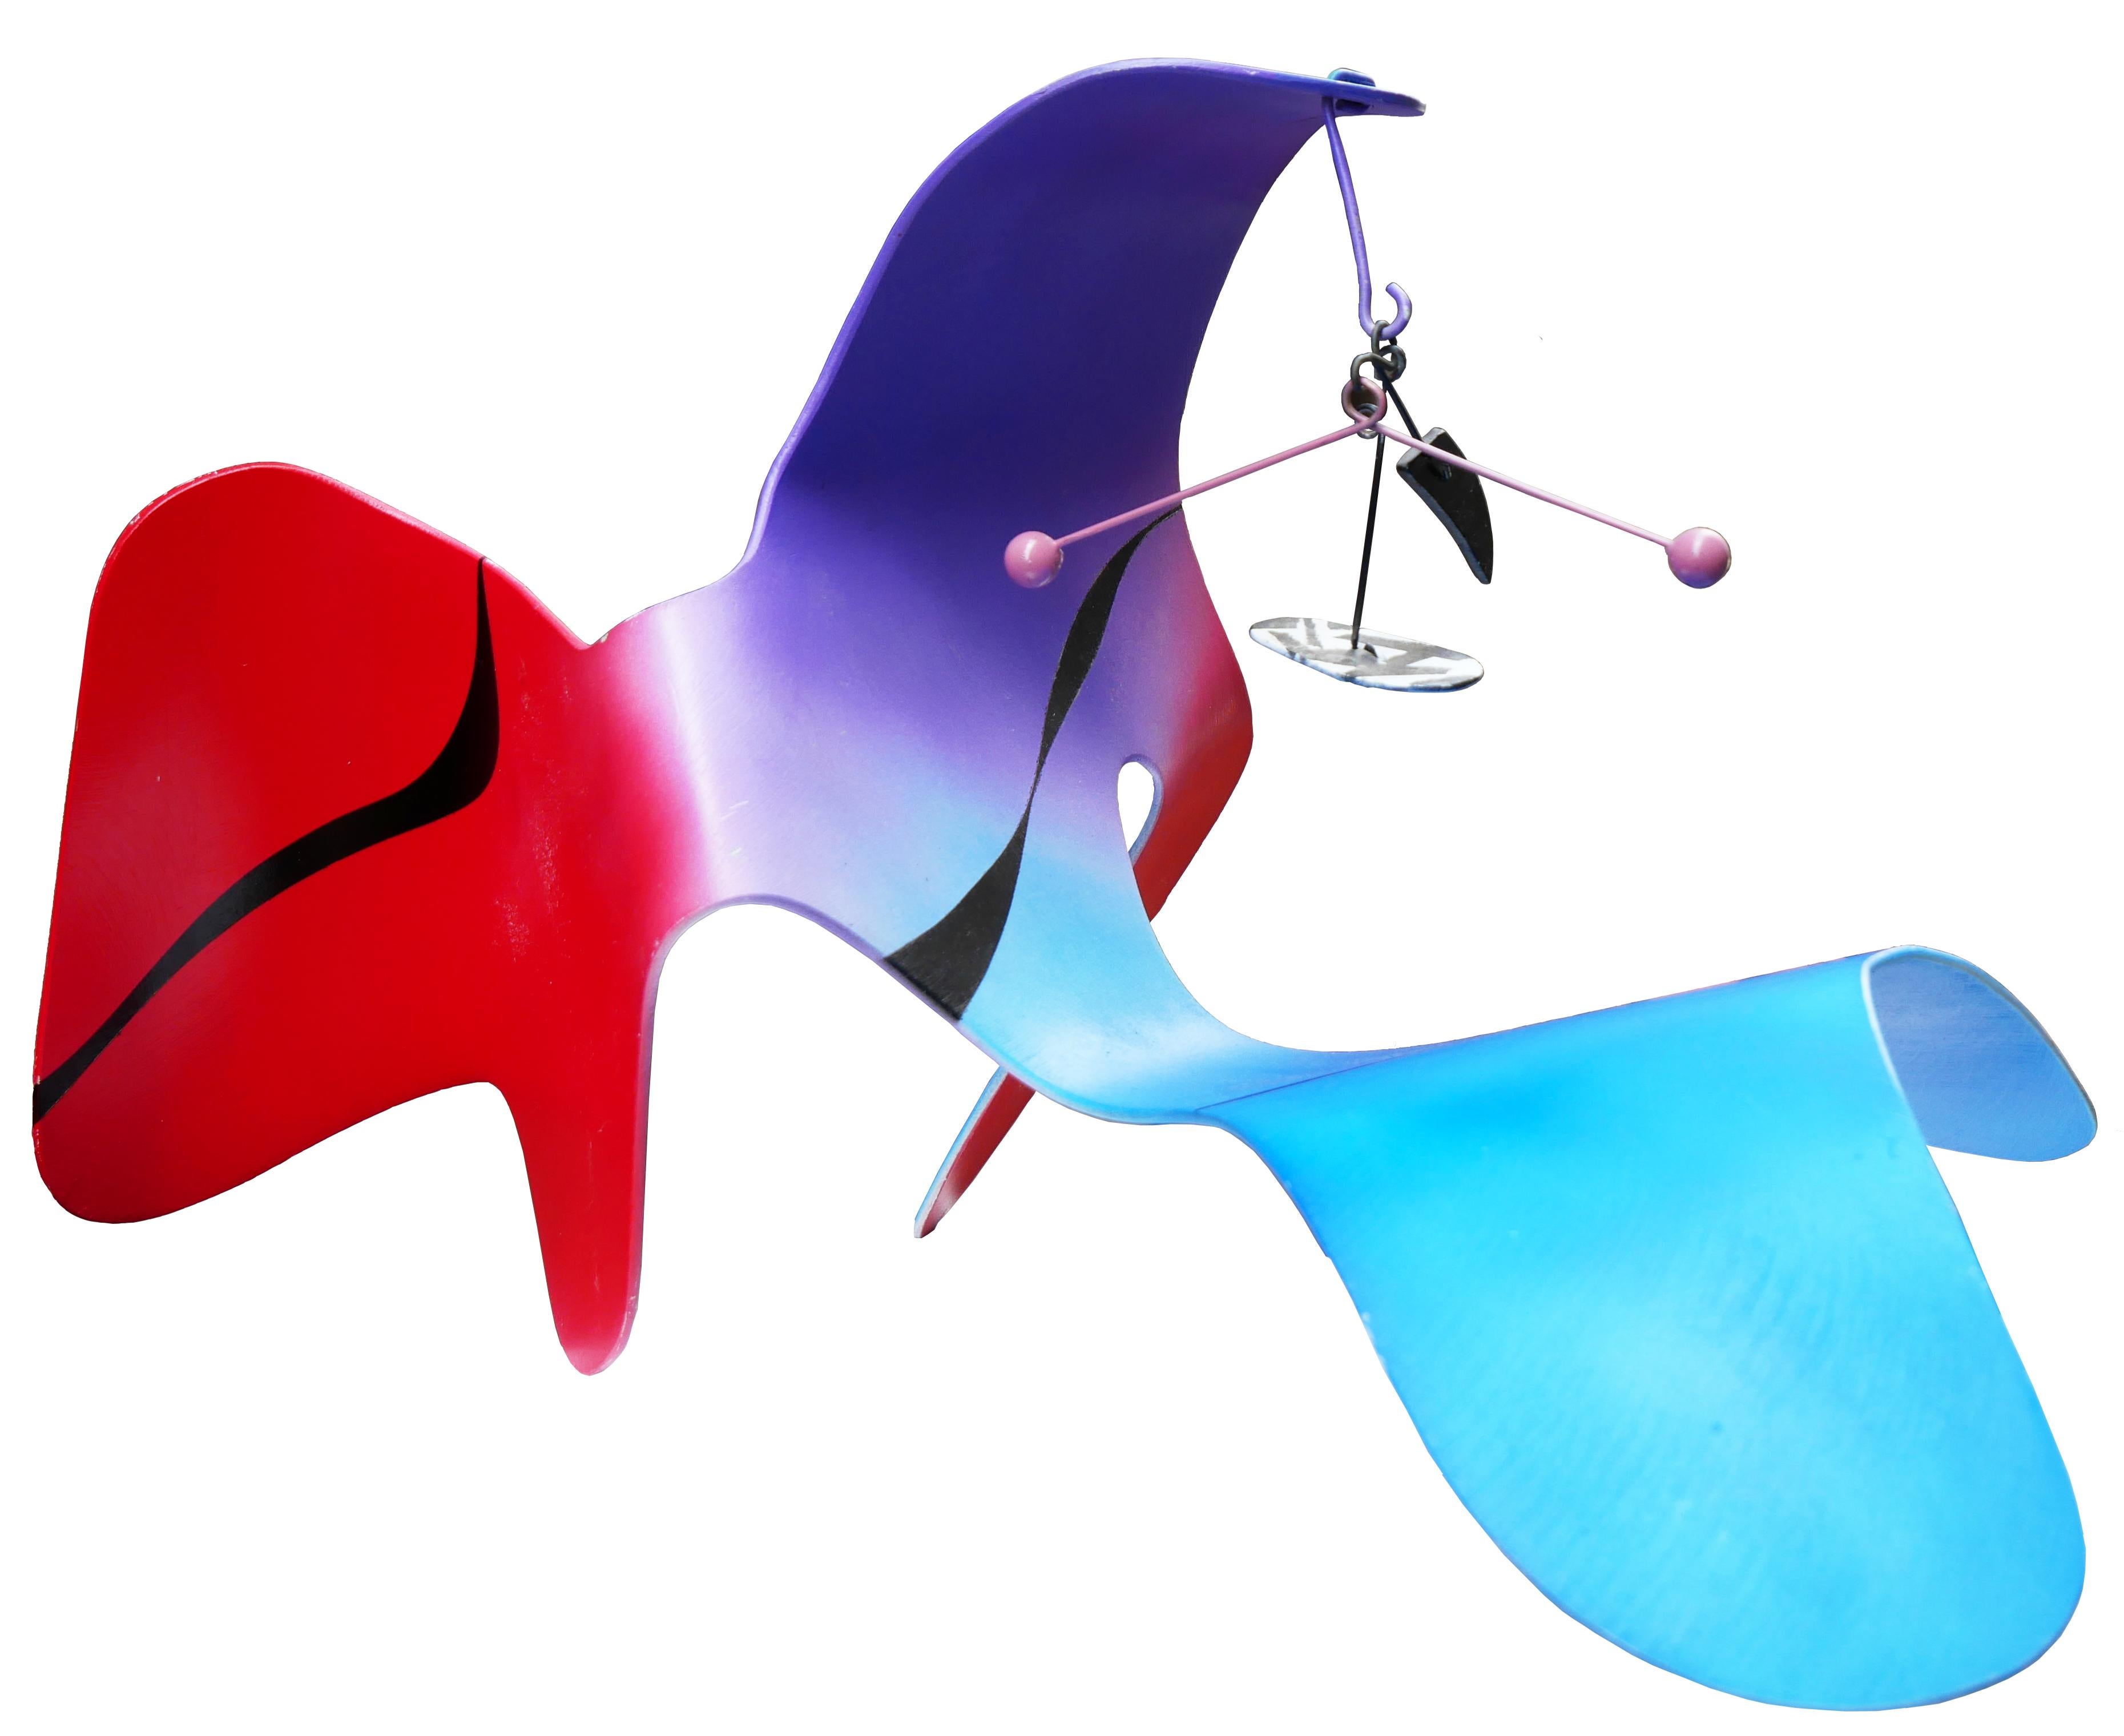 Jon Krawczyk Abstract Sculpture - Red, Purple, and Blue Modernist Abstract Biomorphic Mobile Sculpture